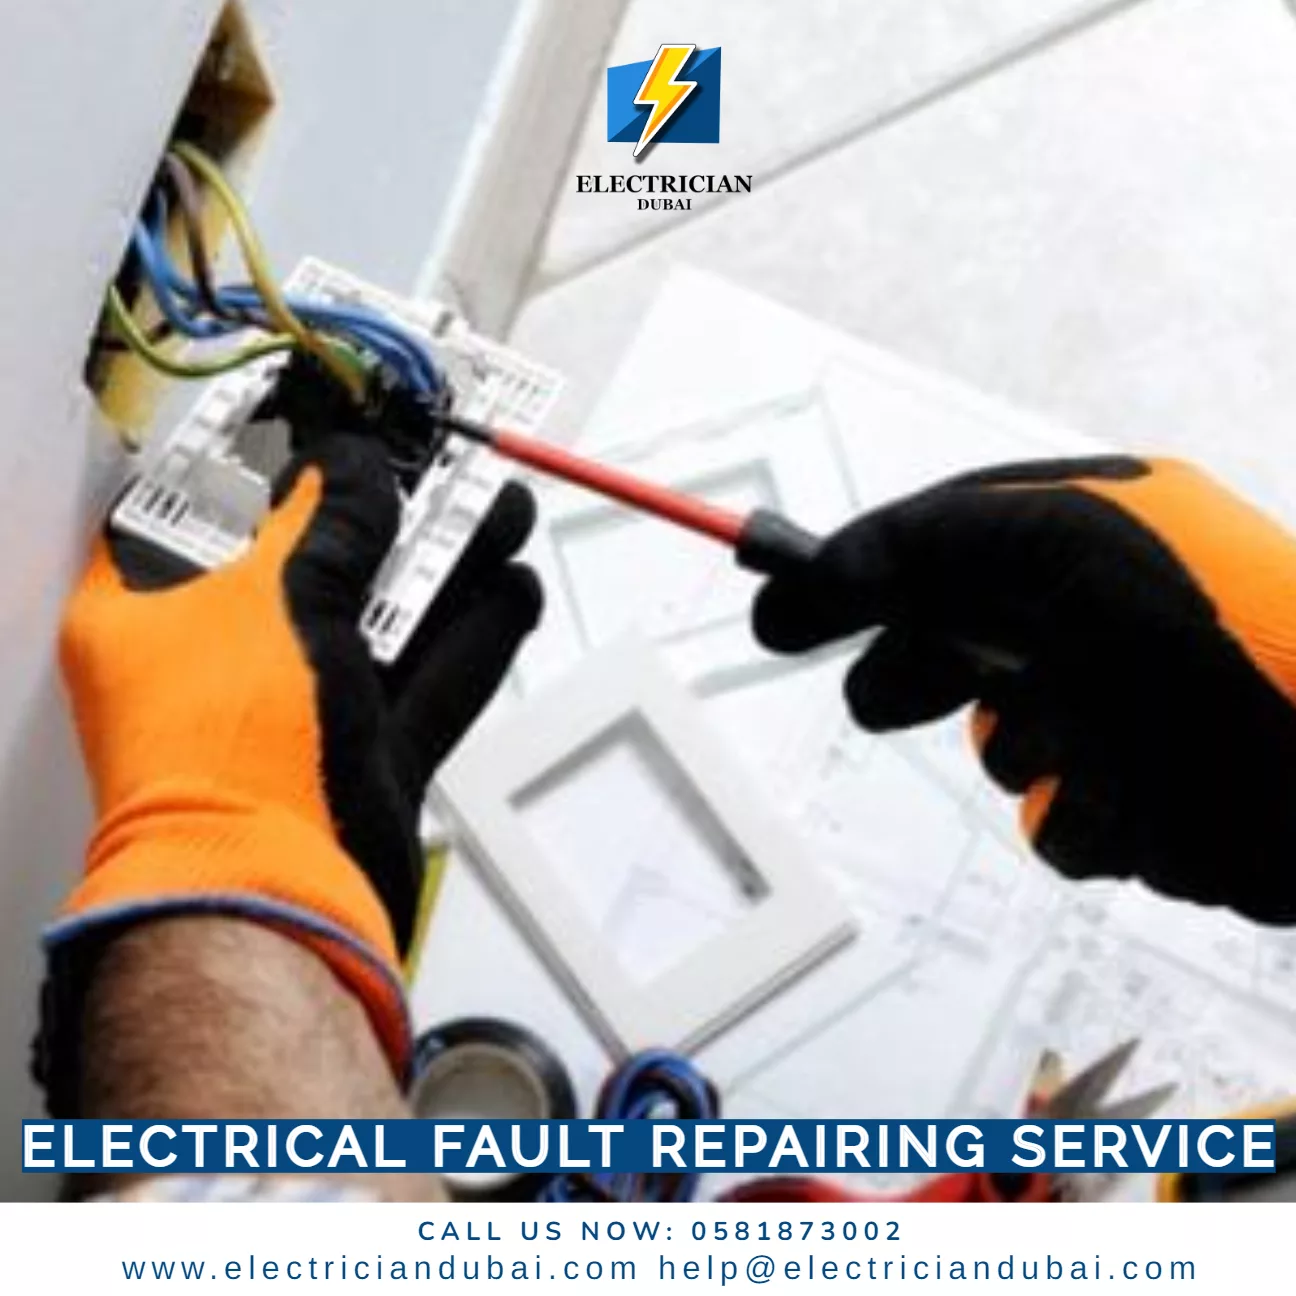 Electrical Fault Repairing Service